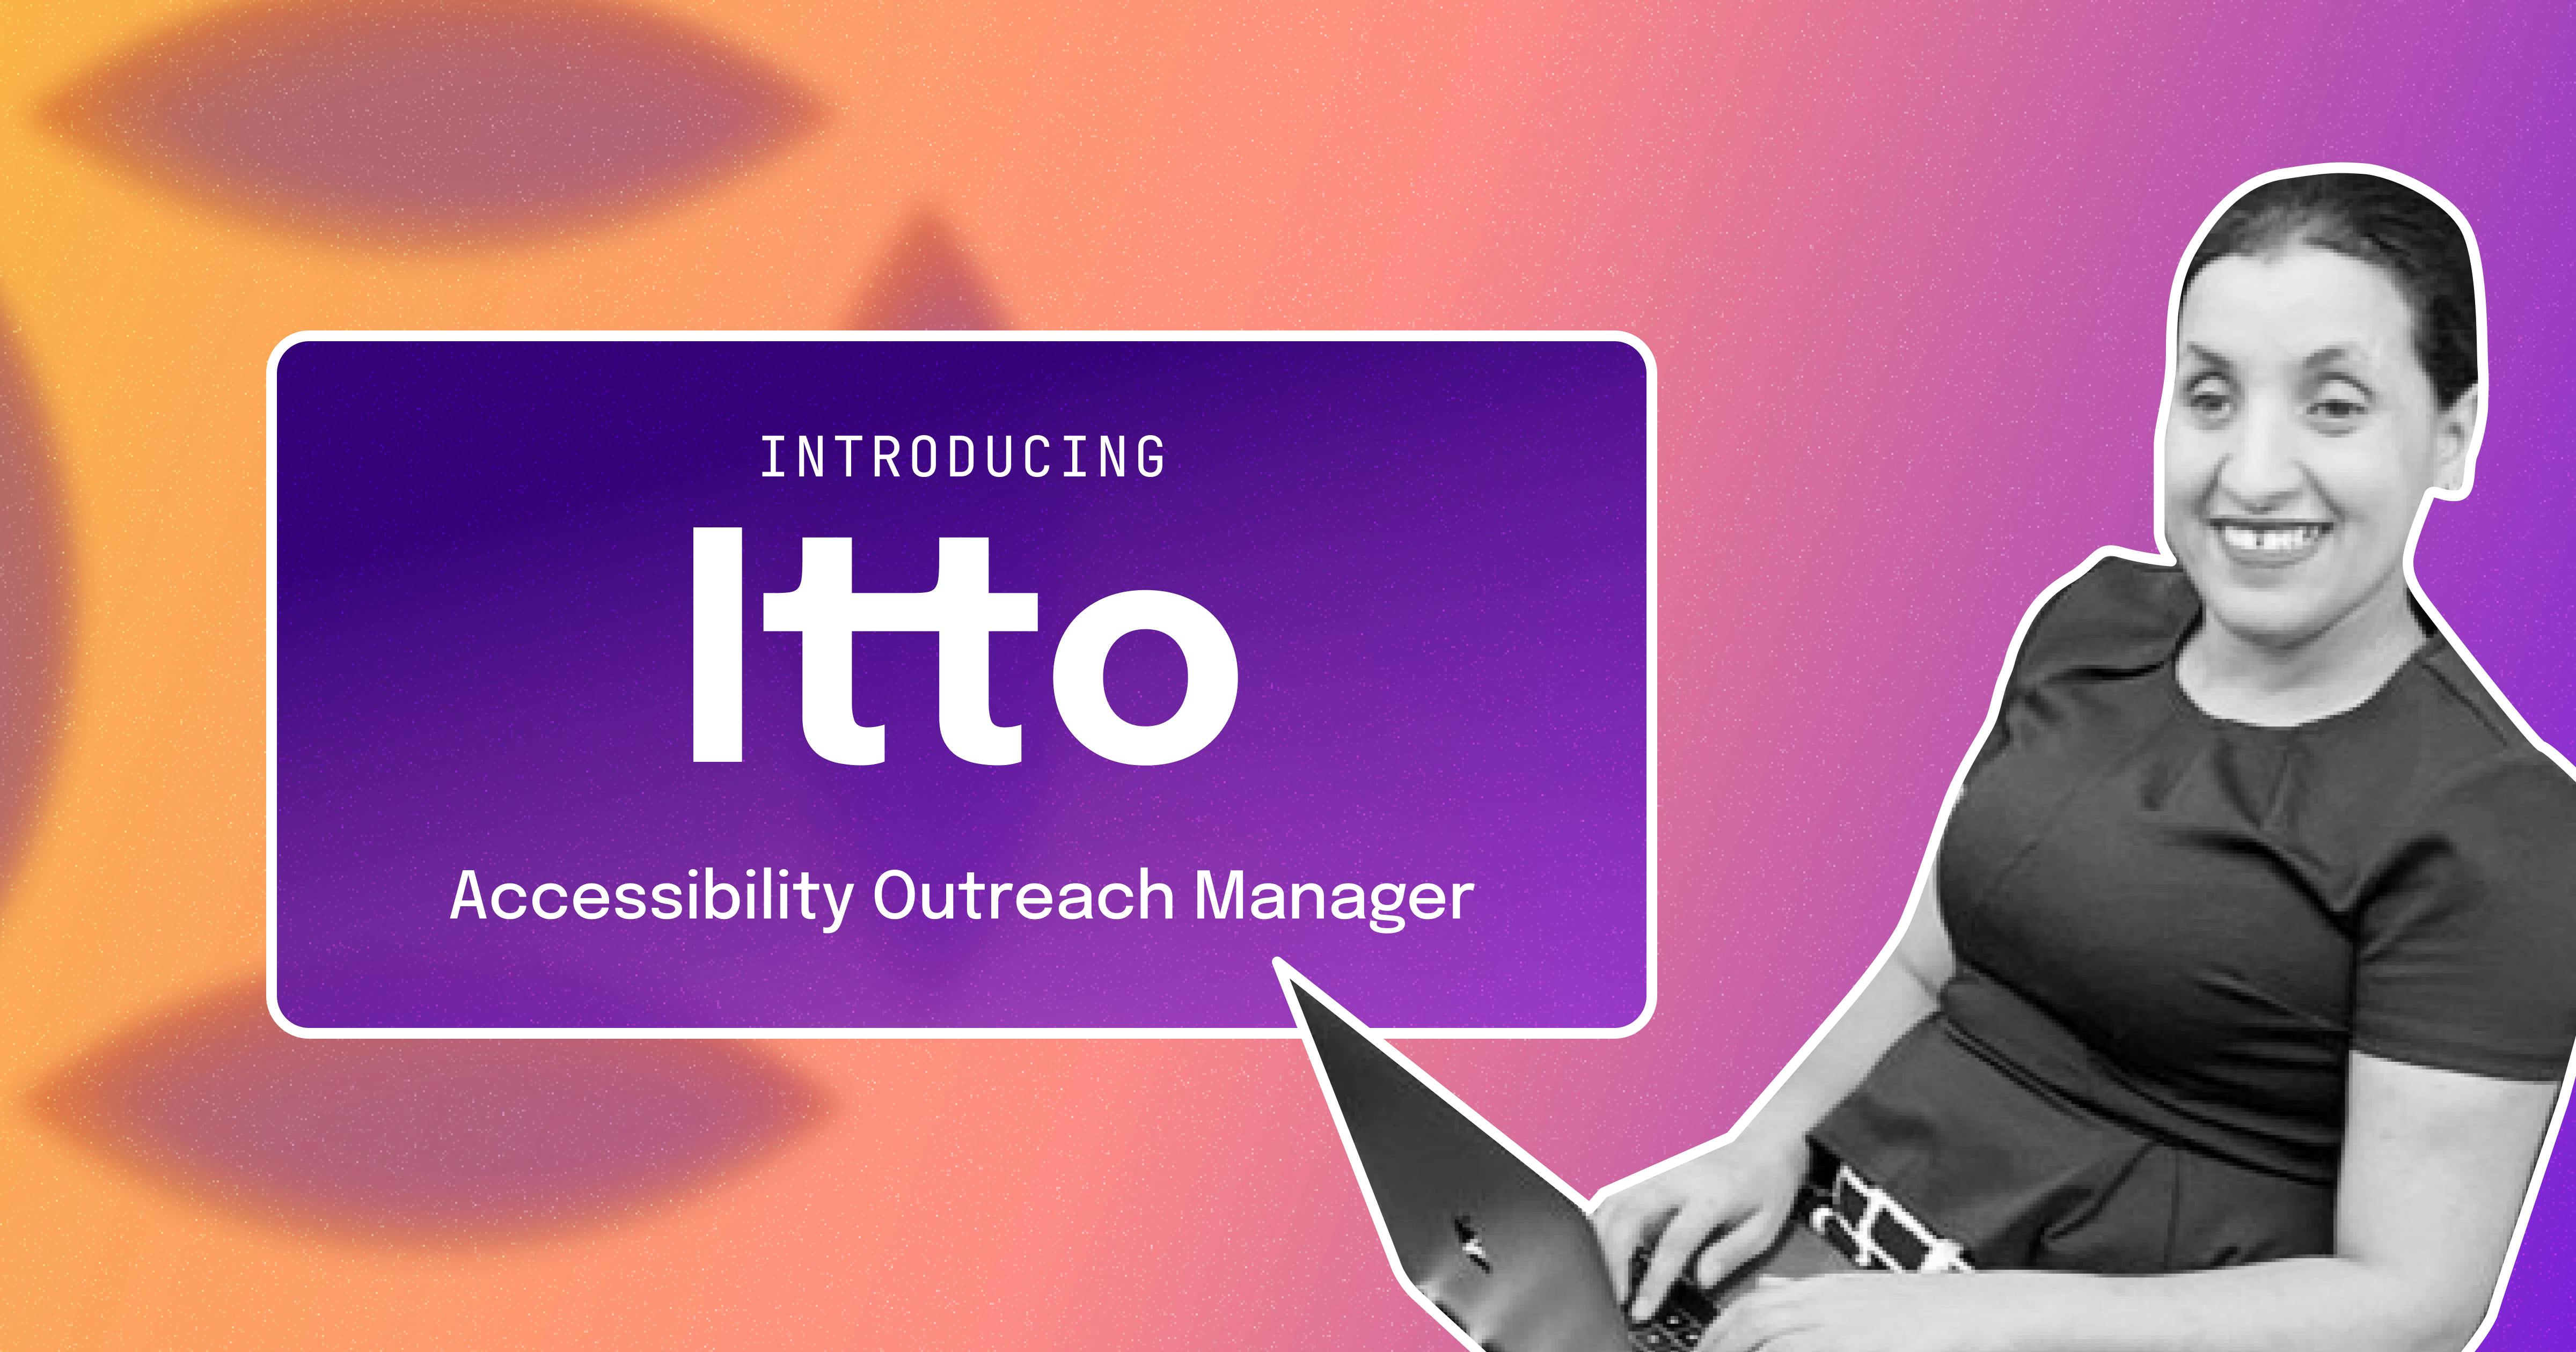 A smiling woman types on a laptop, next to a caption that reads "Introducing Itto, Accessibility Outreach Manager."